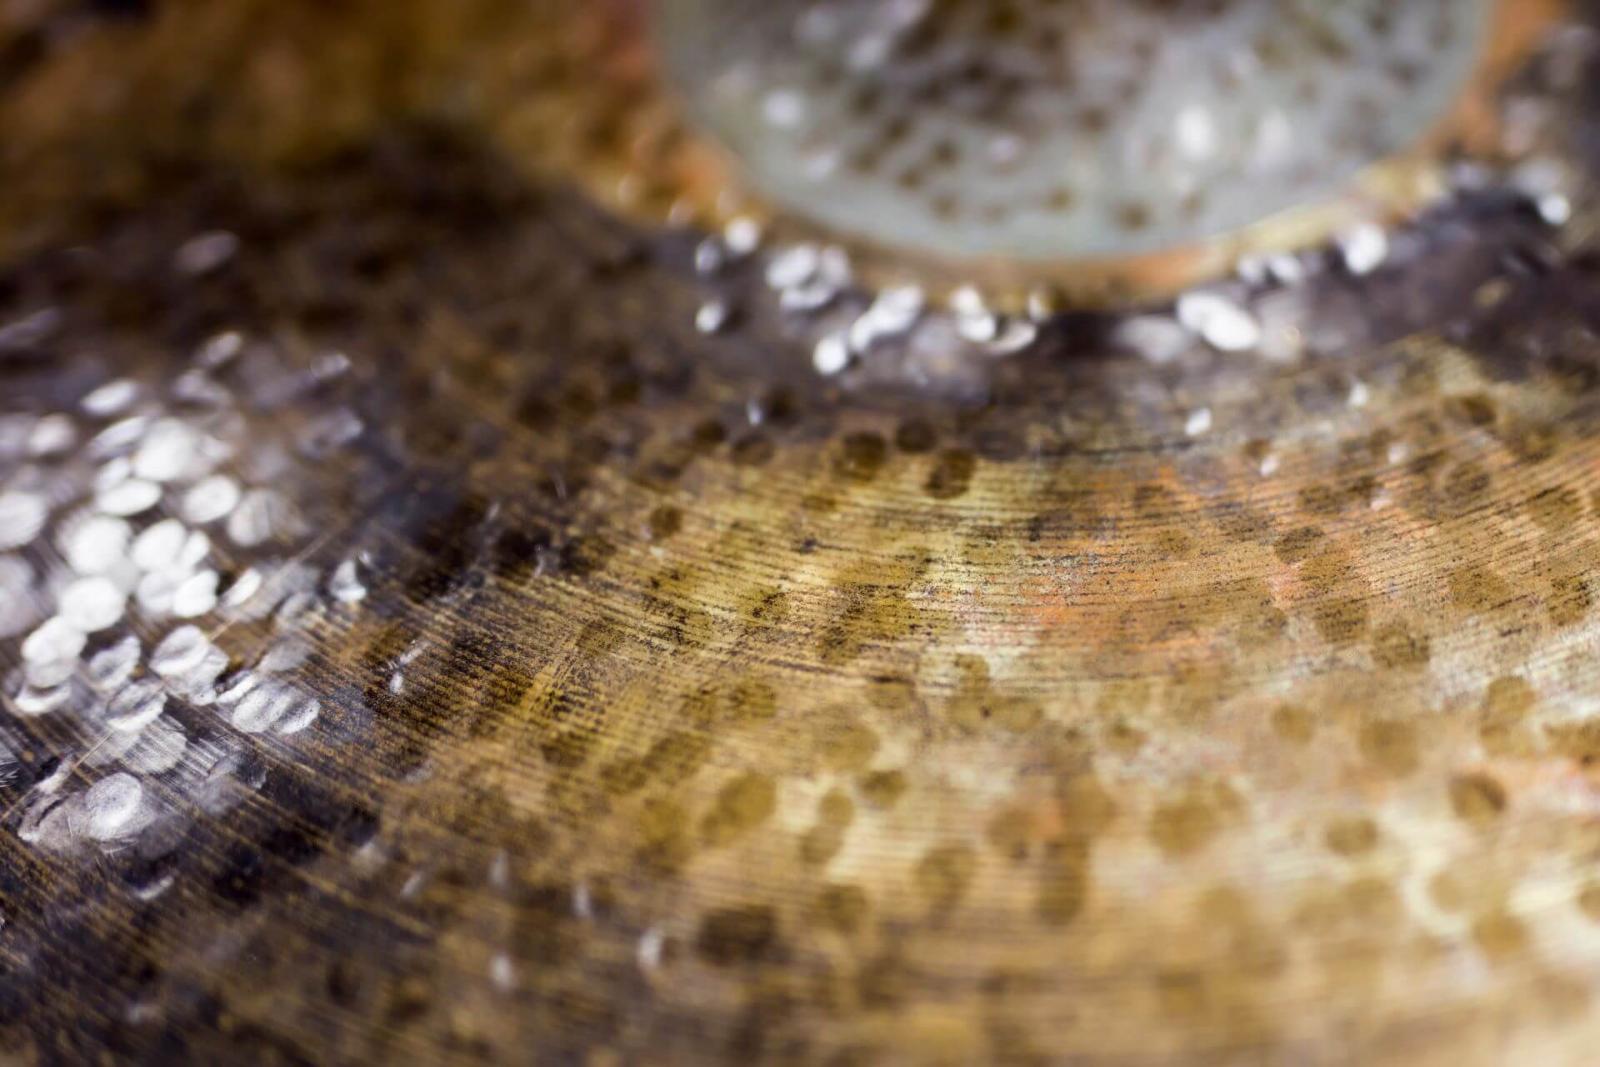 A close-up of a dirty cymbal